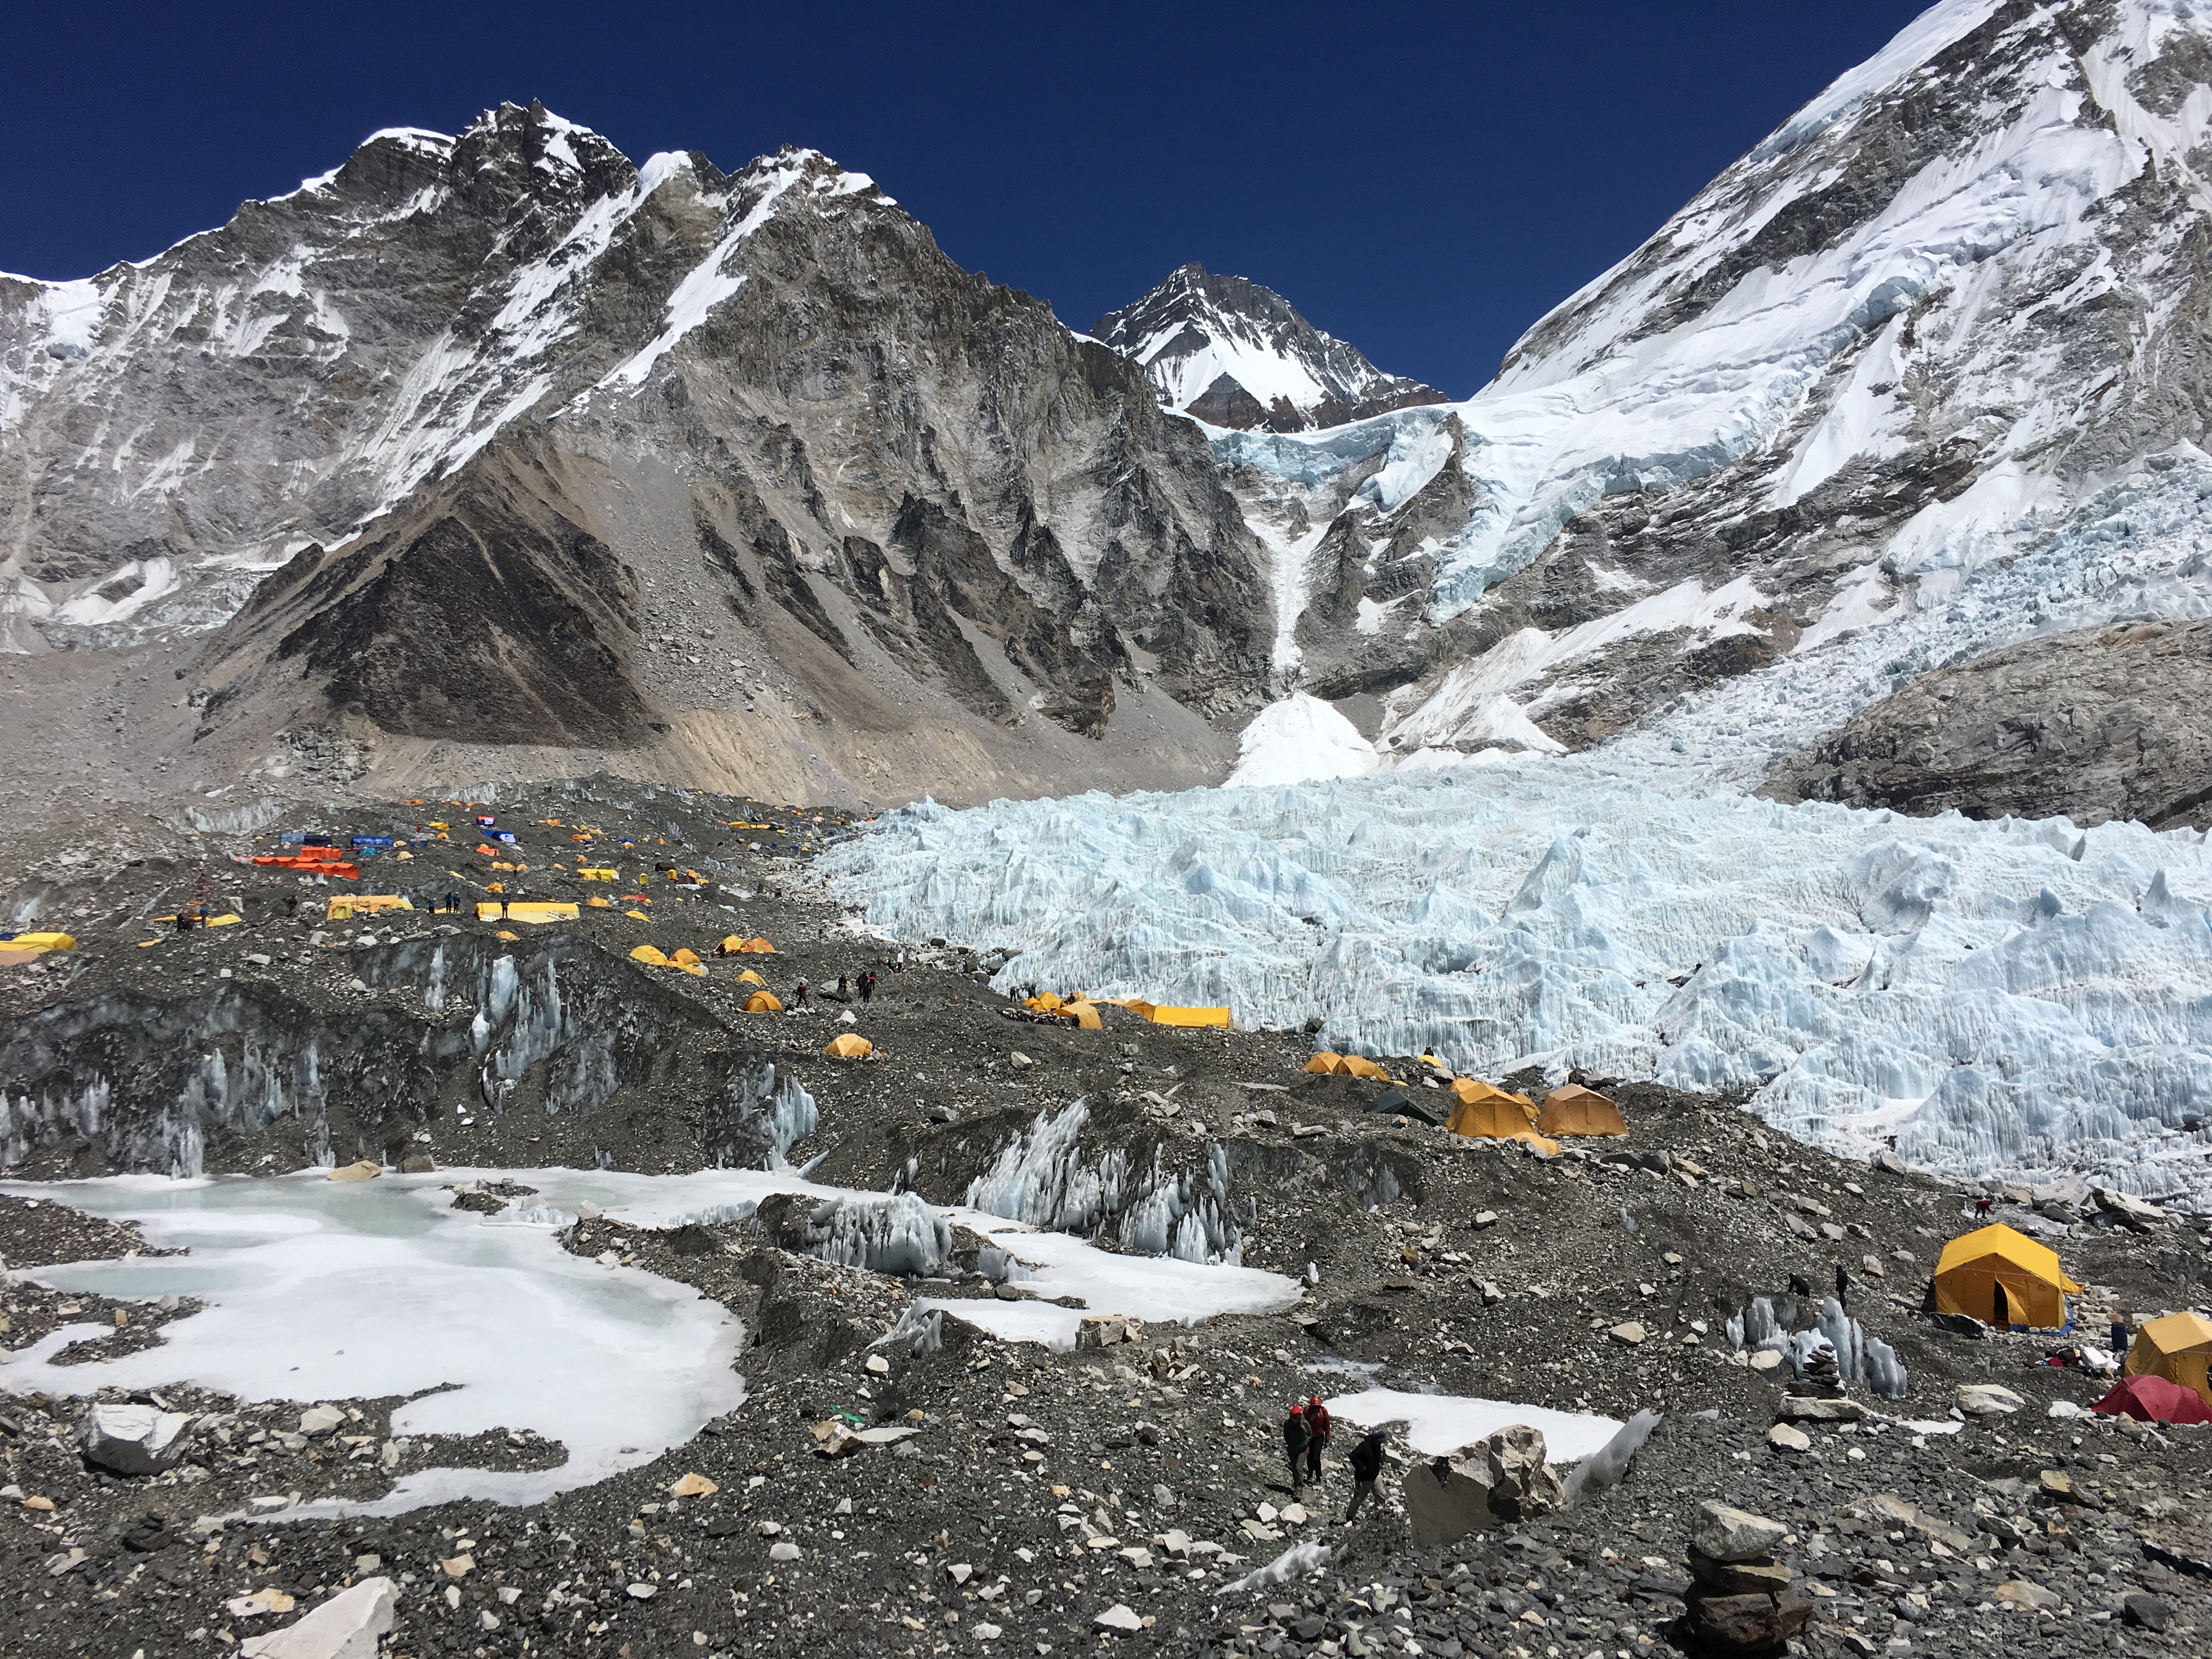 The view of Everest Base Camp